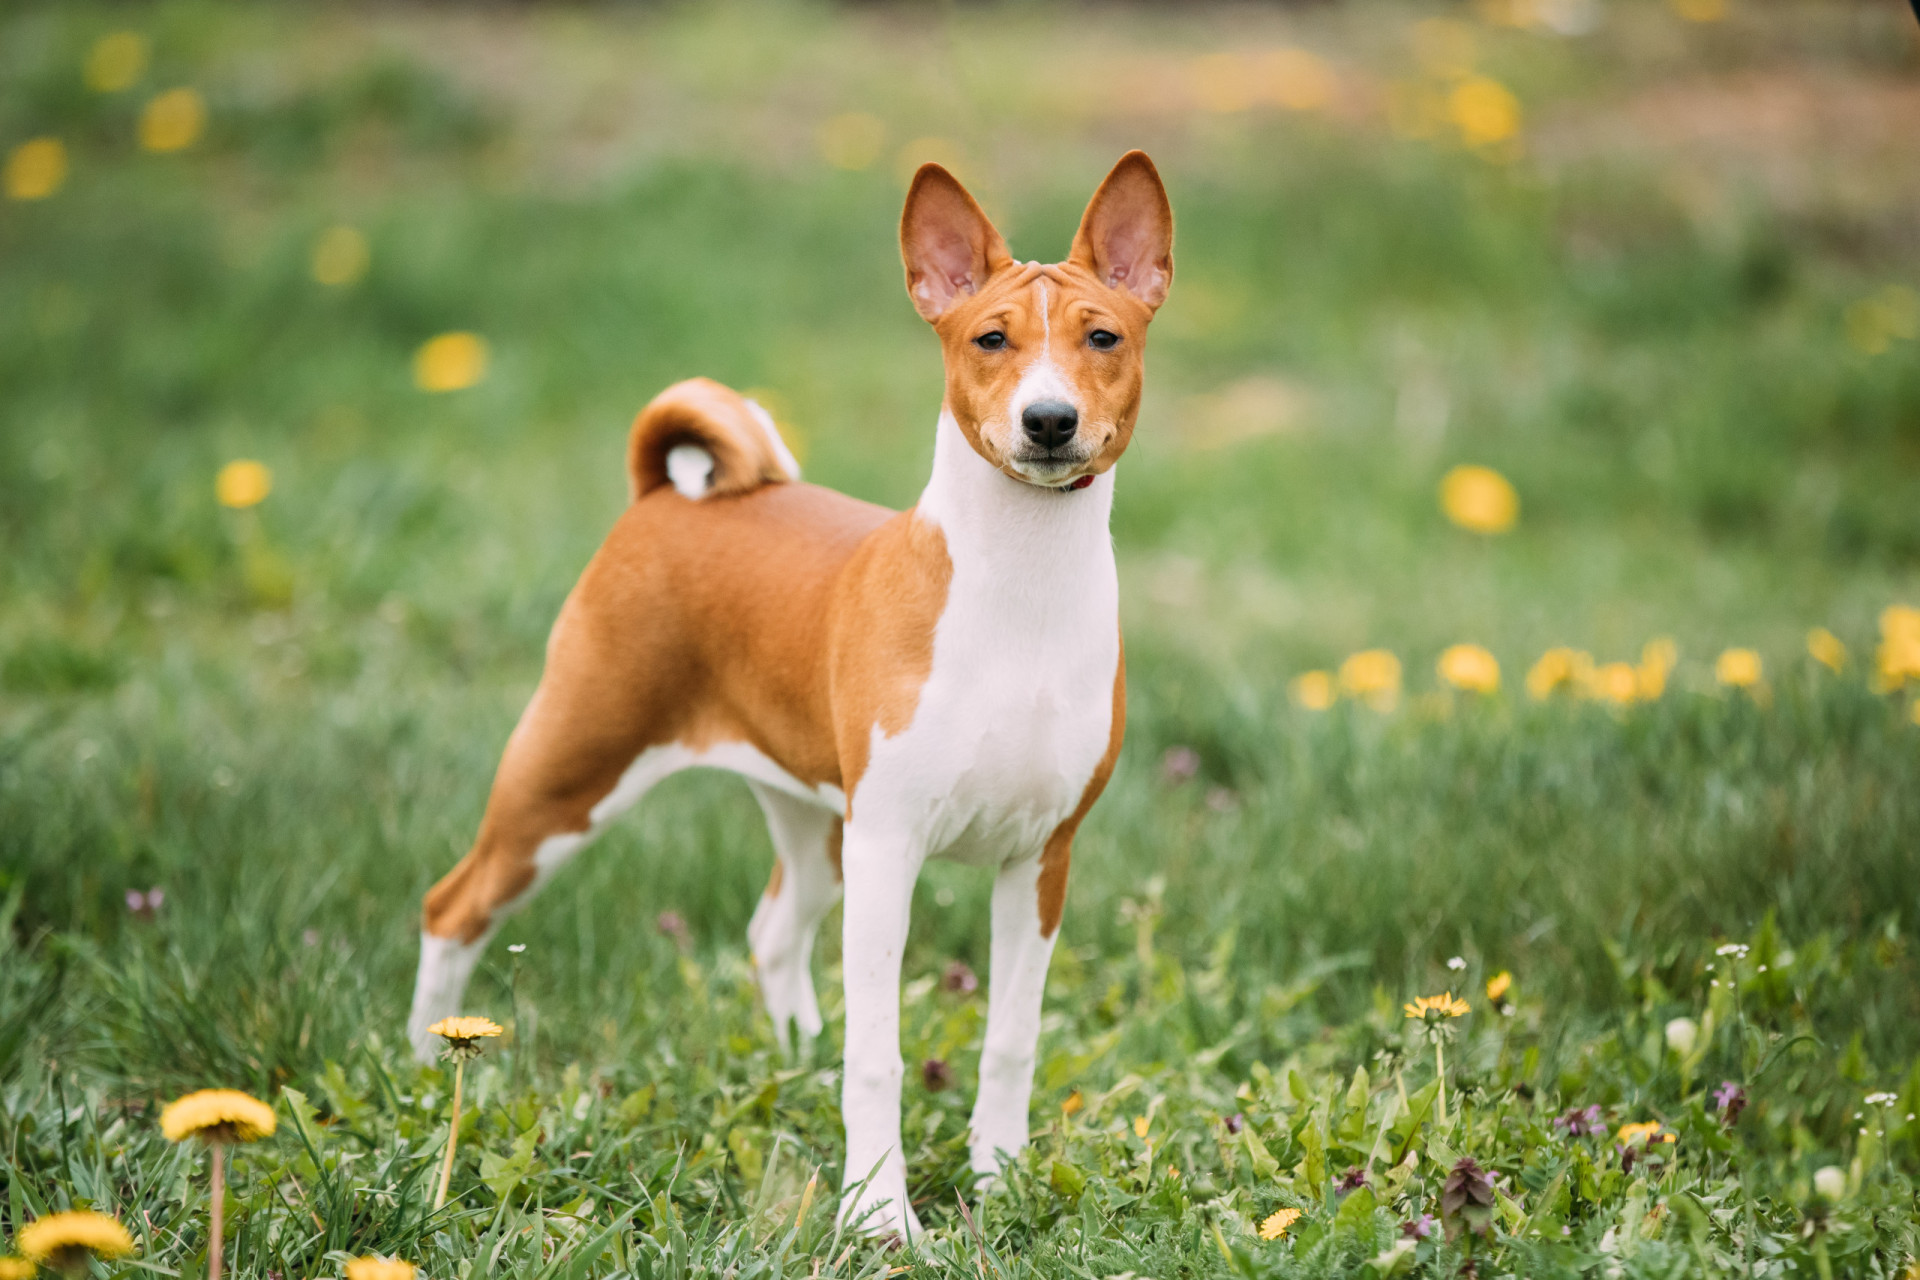 <p>Known for being a "barkless" dog, the Basenji is a high-energy pup who originally served as a hunting dog. They live about 12 years.</p> <p>Sources: (Business Insider) (Southern Living) (Top Dog Tips)</p> <p>See also: <a href="https://www.starsinsider.com/lifestyle/574053/meet-the-dogs-that-are-banned-around-the-world">Dog breeds that are banned in some countries</a></p>